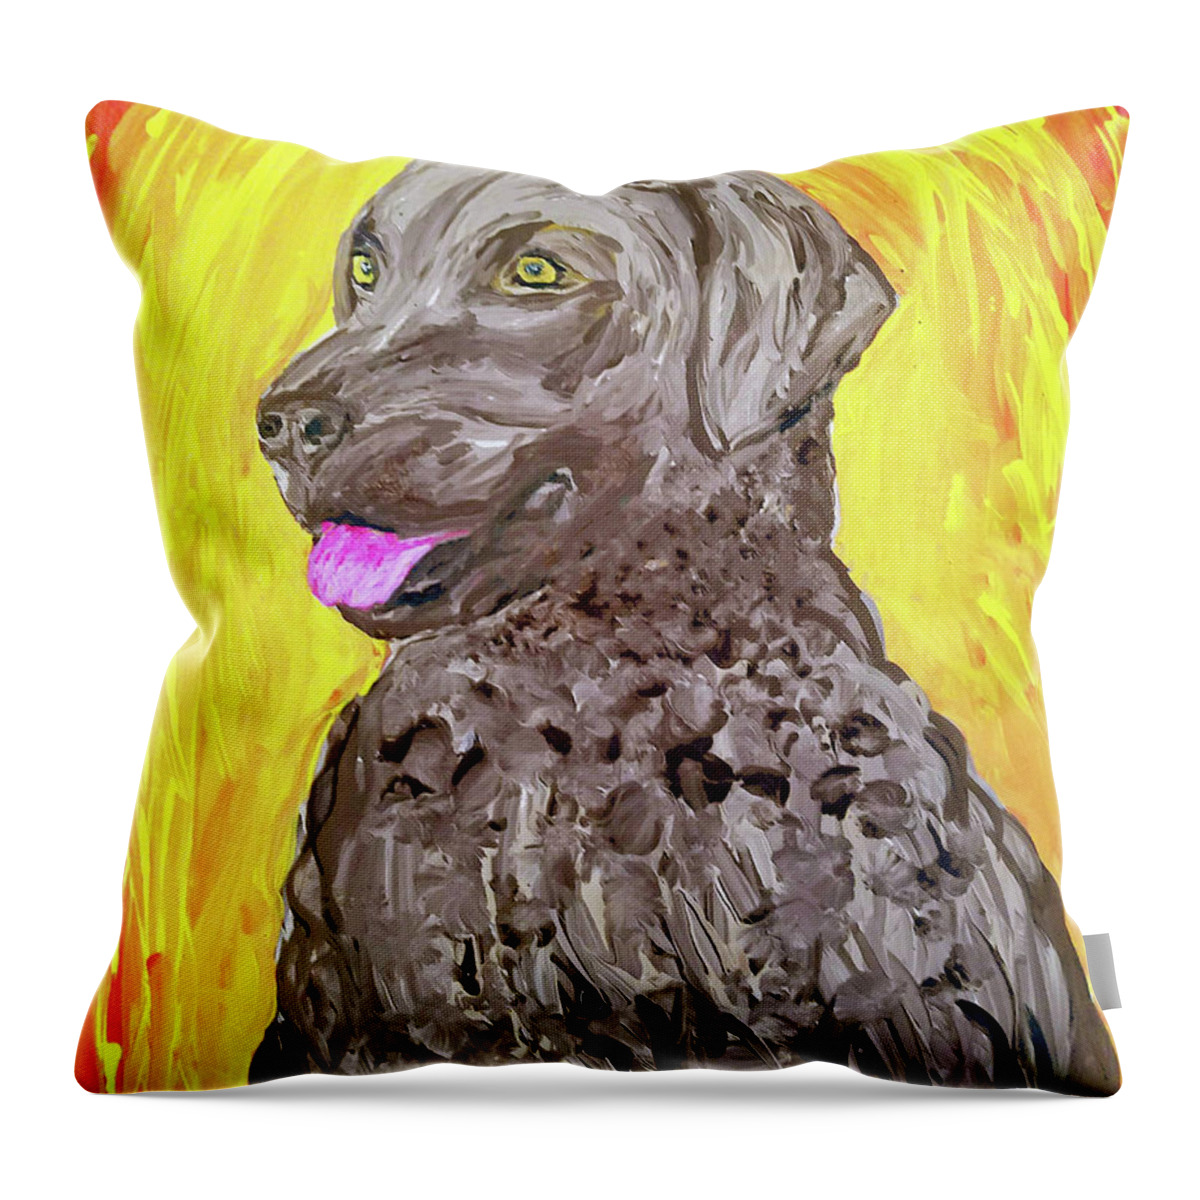 Dog Throw Pillow featuring the painting Susquehanna Date With Paint Mar 19 by Ania M Milo